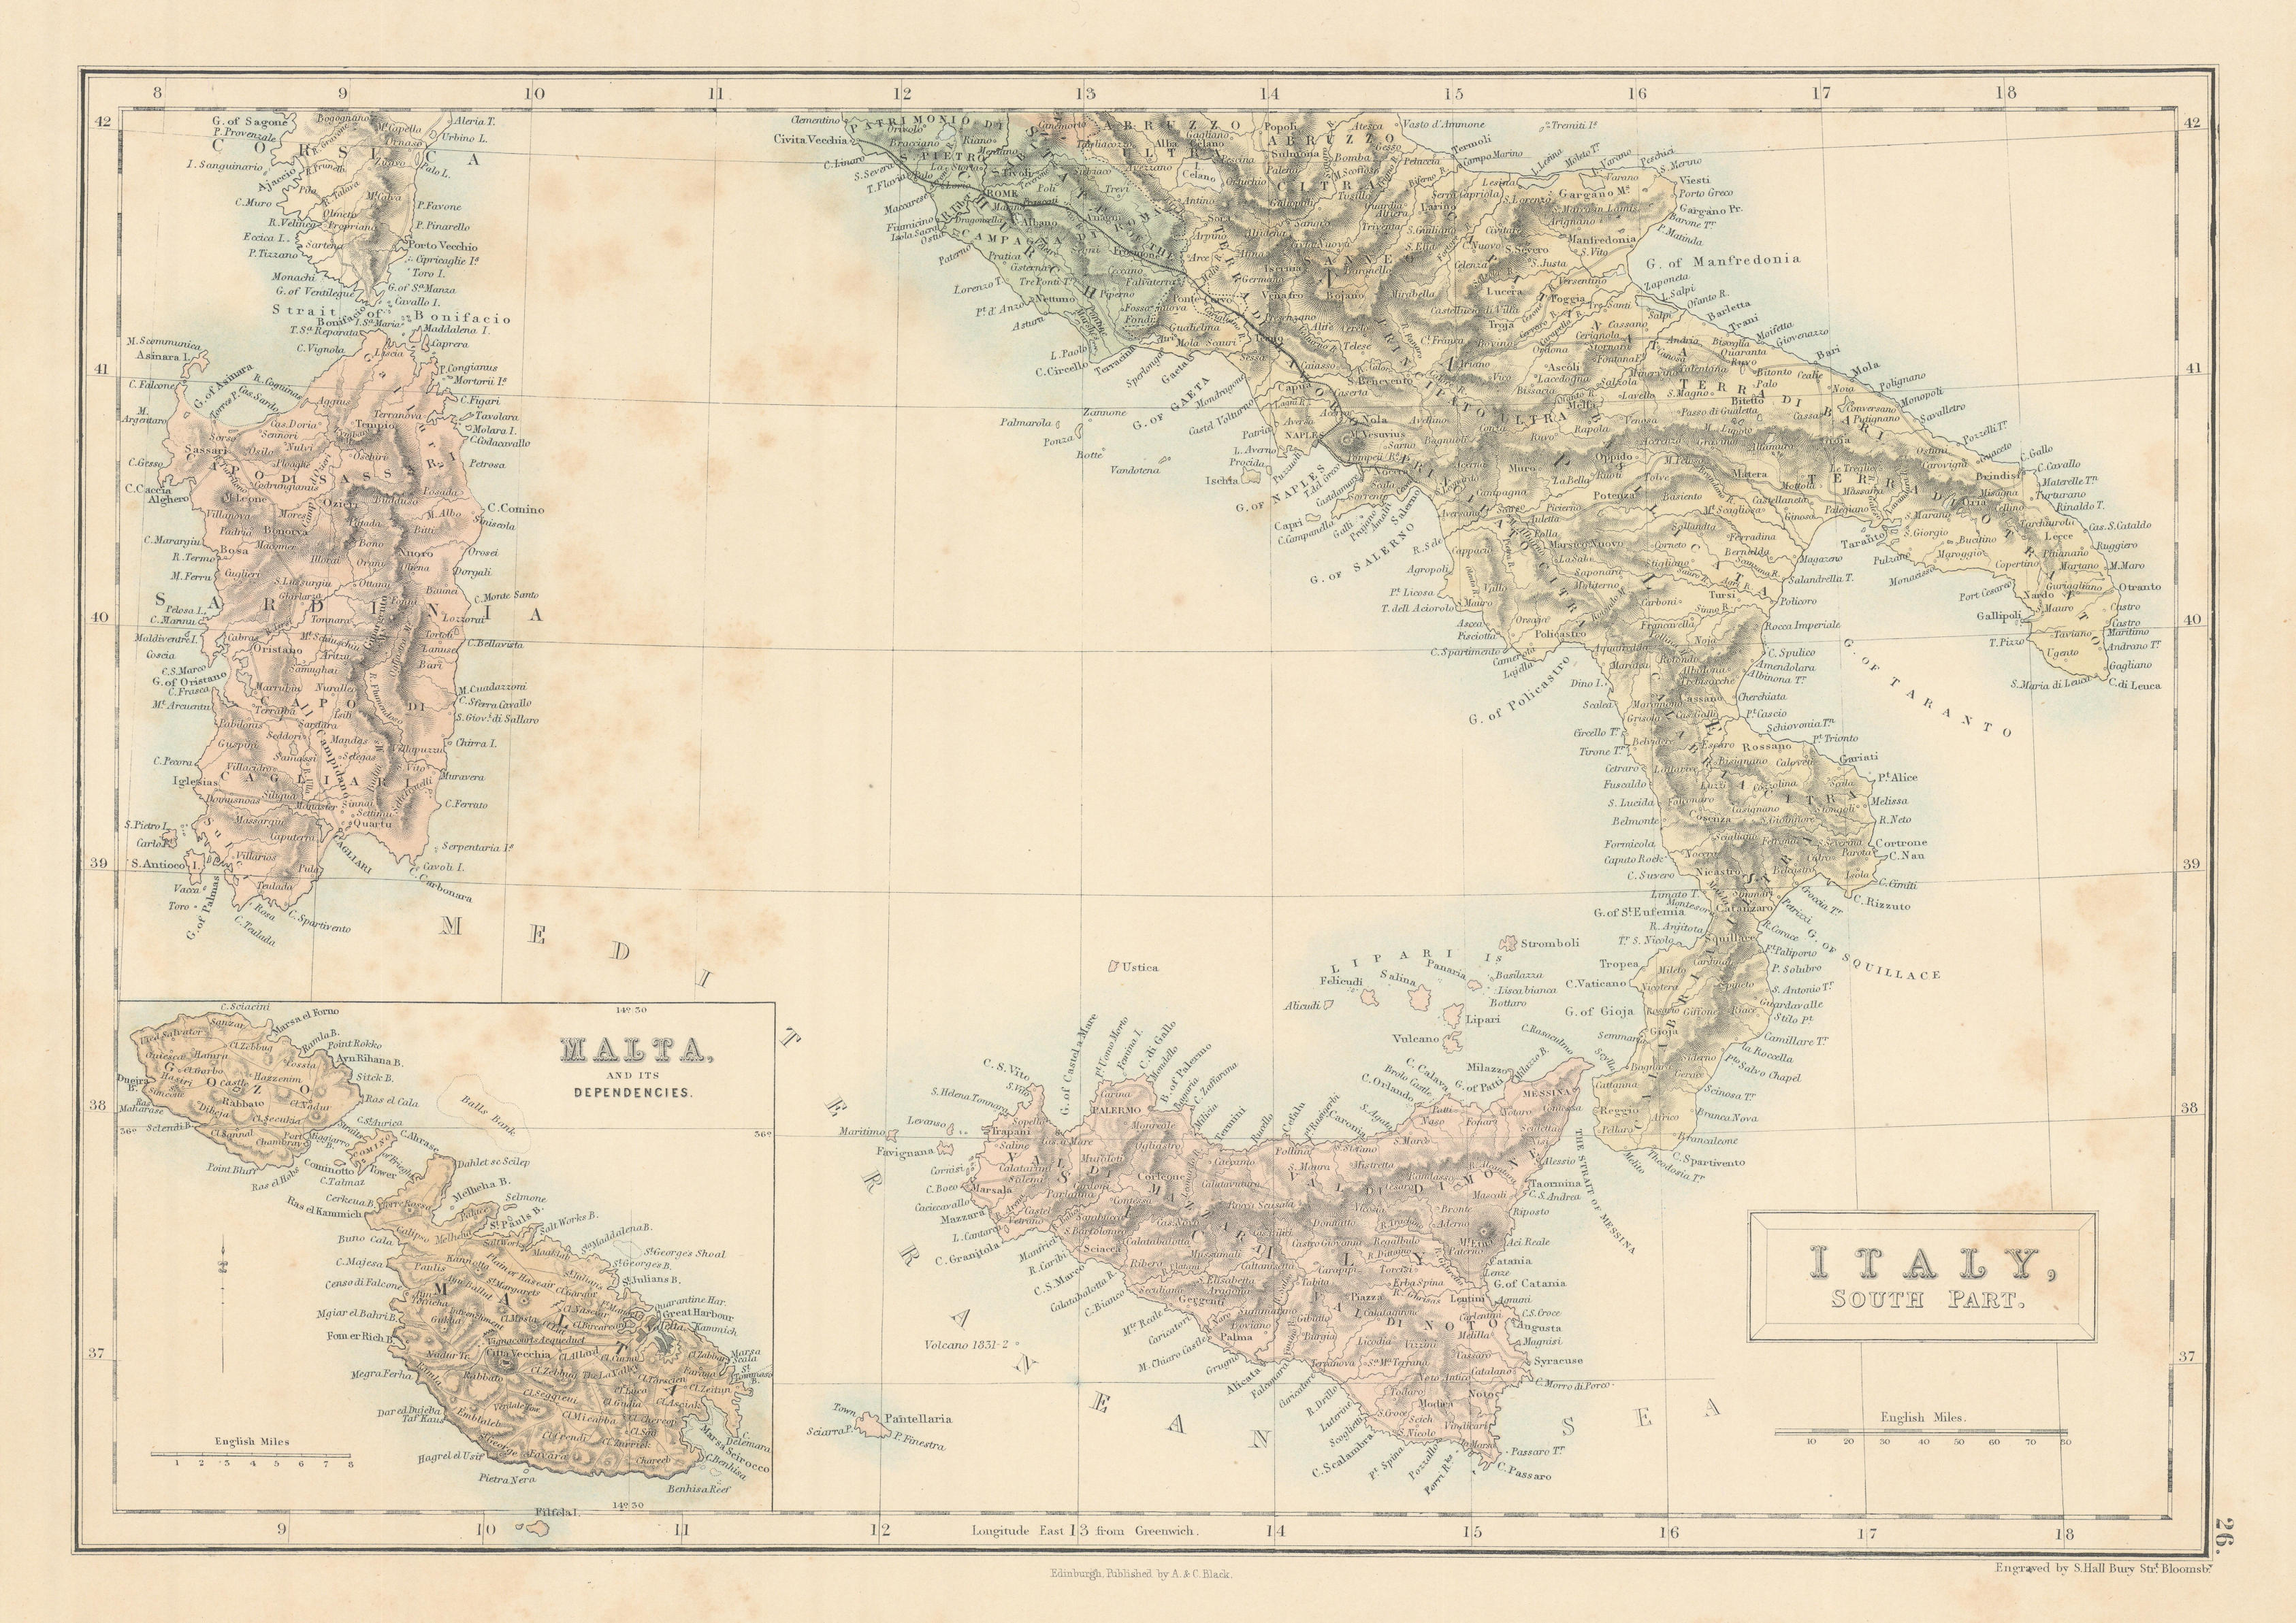 Associate Product Italy, south part. Inset Malta. Sardinia Sicily. SIDNEY HALL 1862 old map